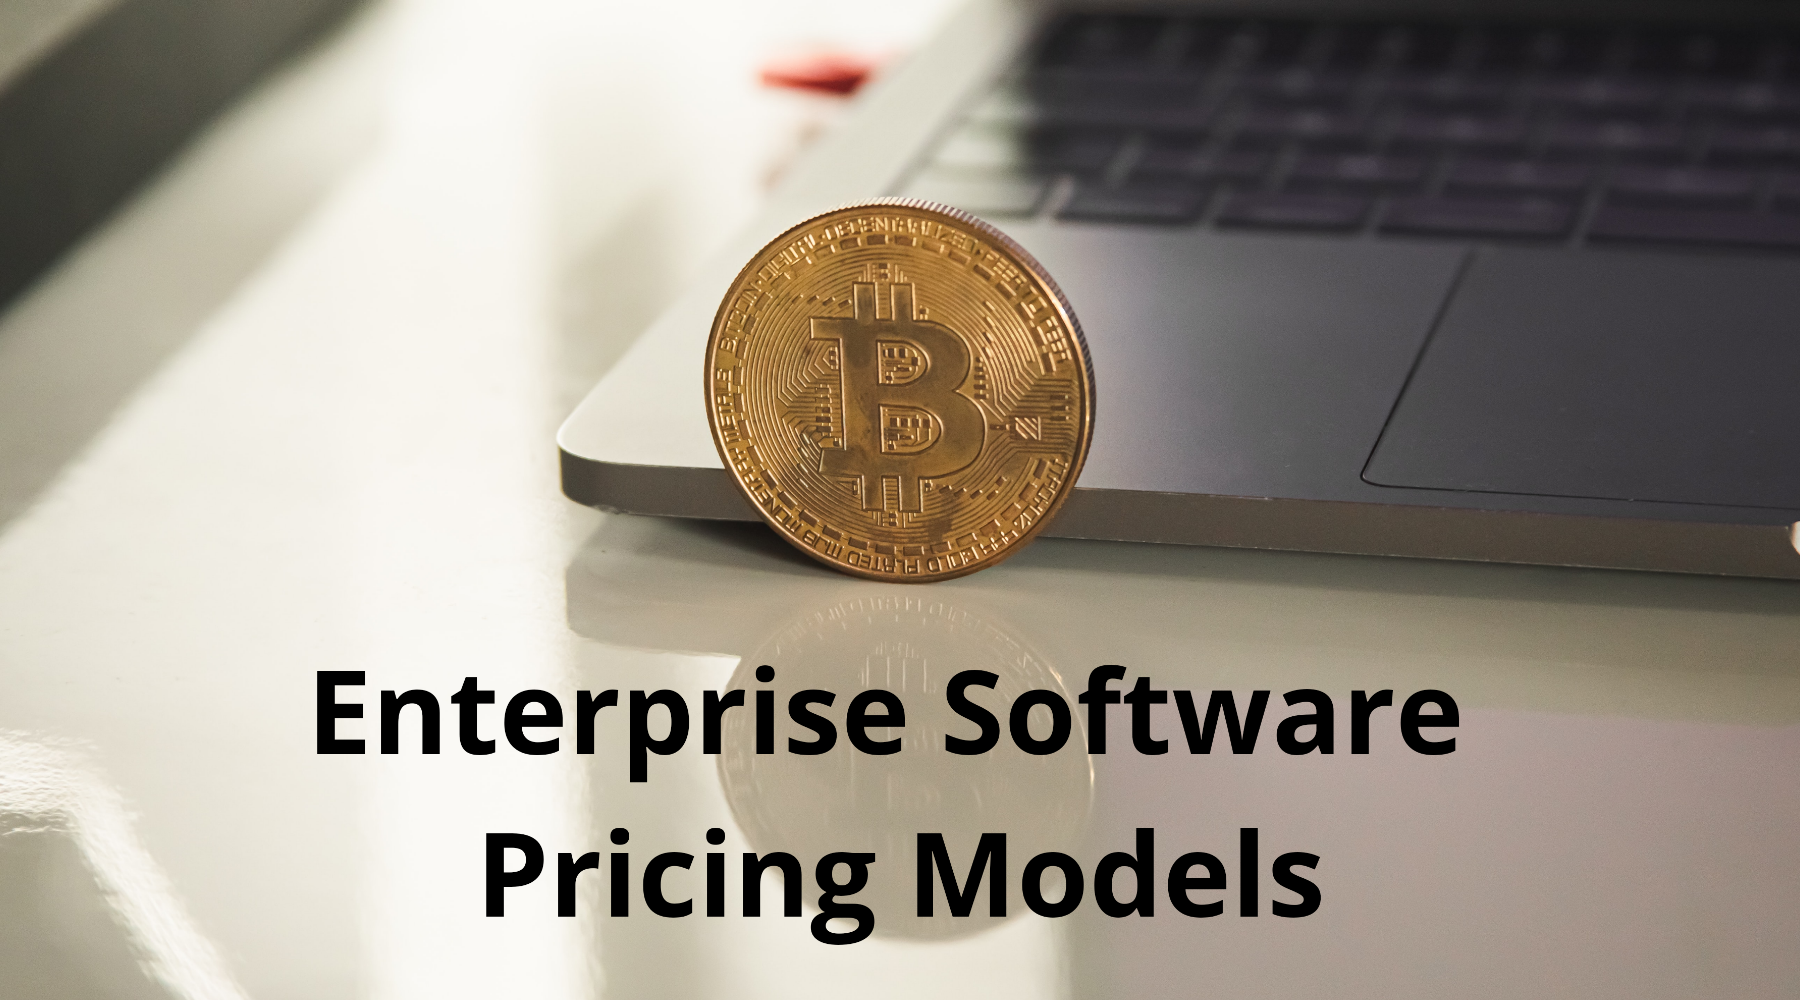 Enterprise Software Pricing Models And Their Impact on Startups